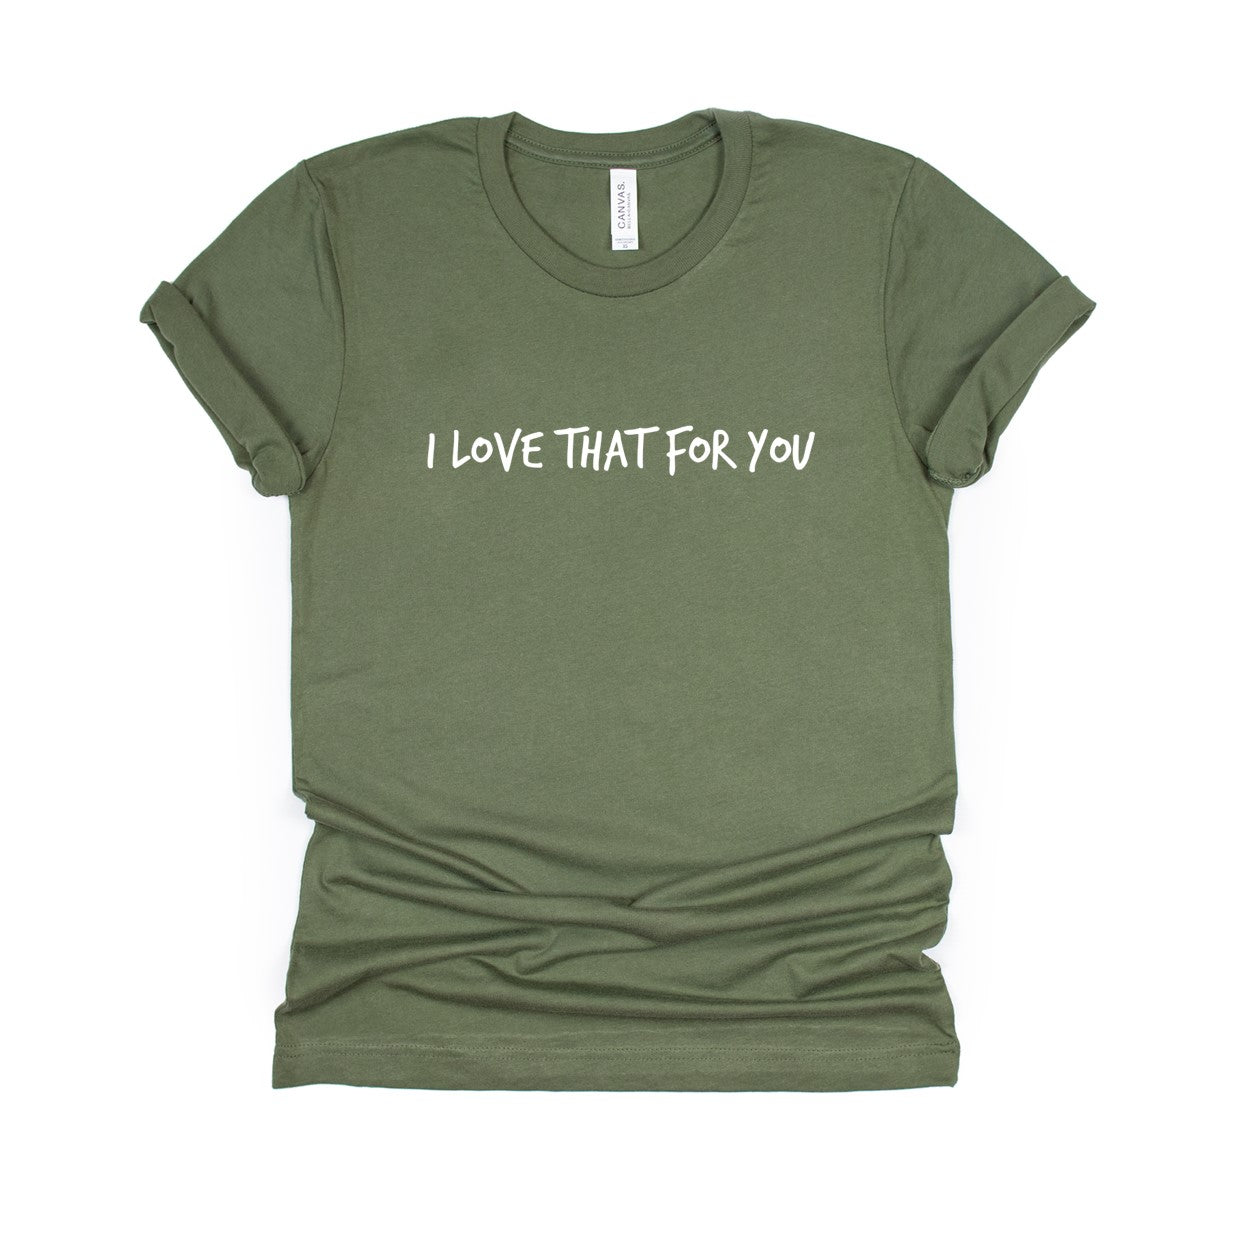 i love that for you t-shirt